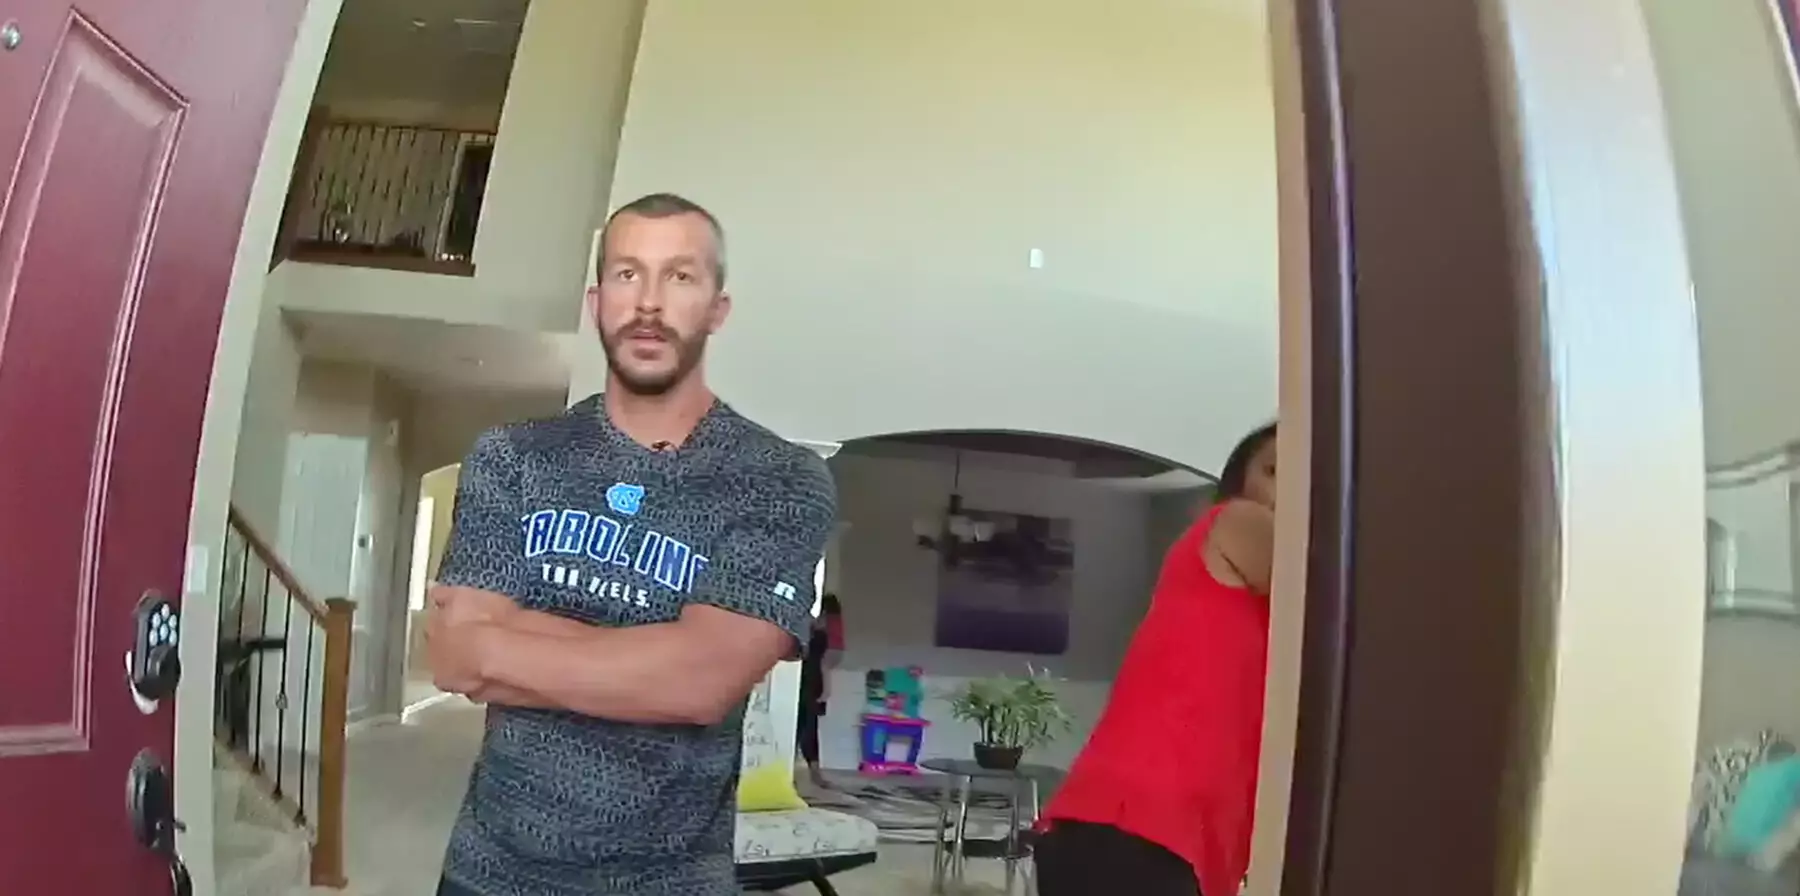 Chris Watts initially maintained his innocence but went on to confess his crimes in November 2018 (